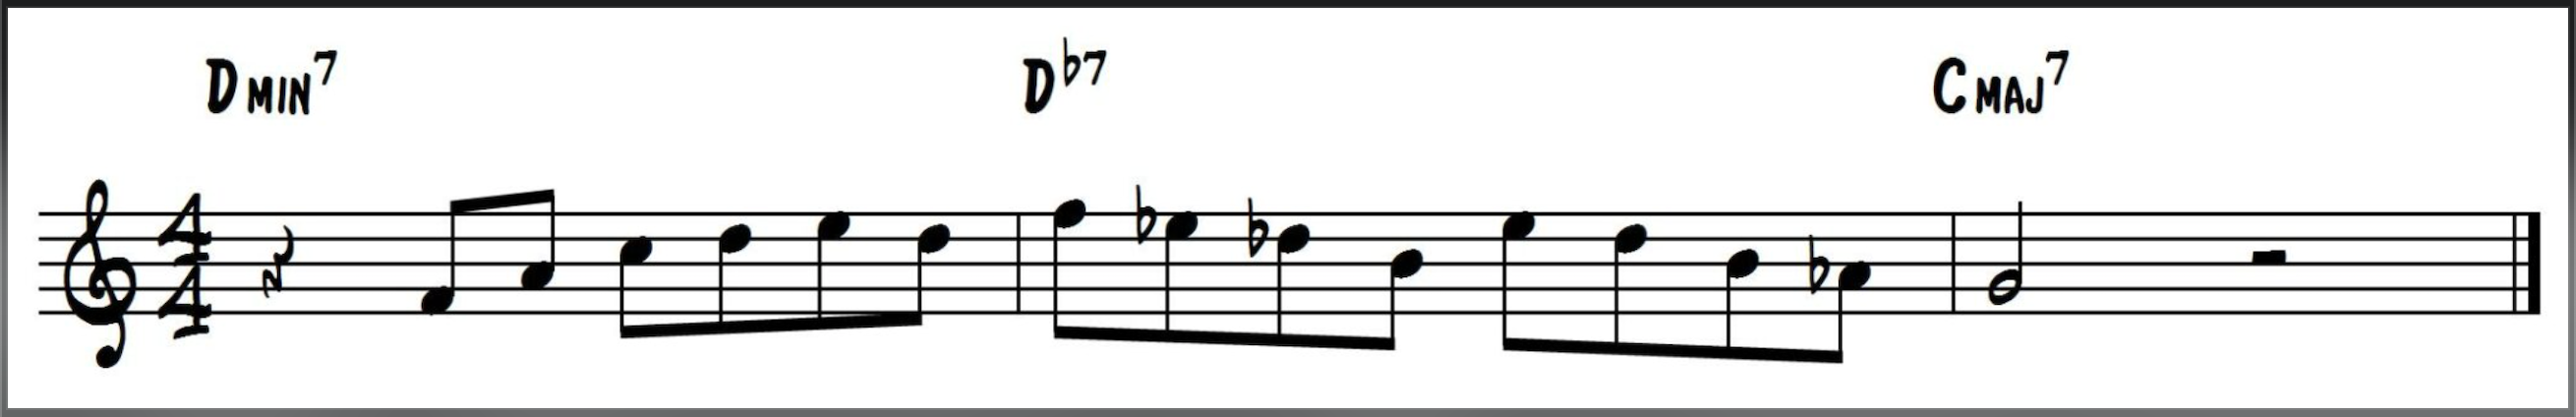 Tritone Substitution in a ii-V-I chord progression in the key of C major